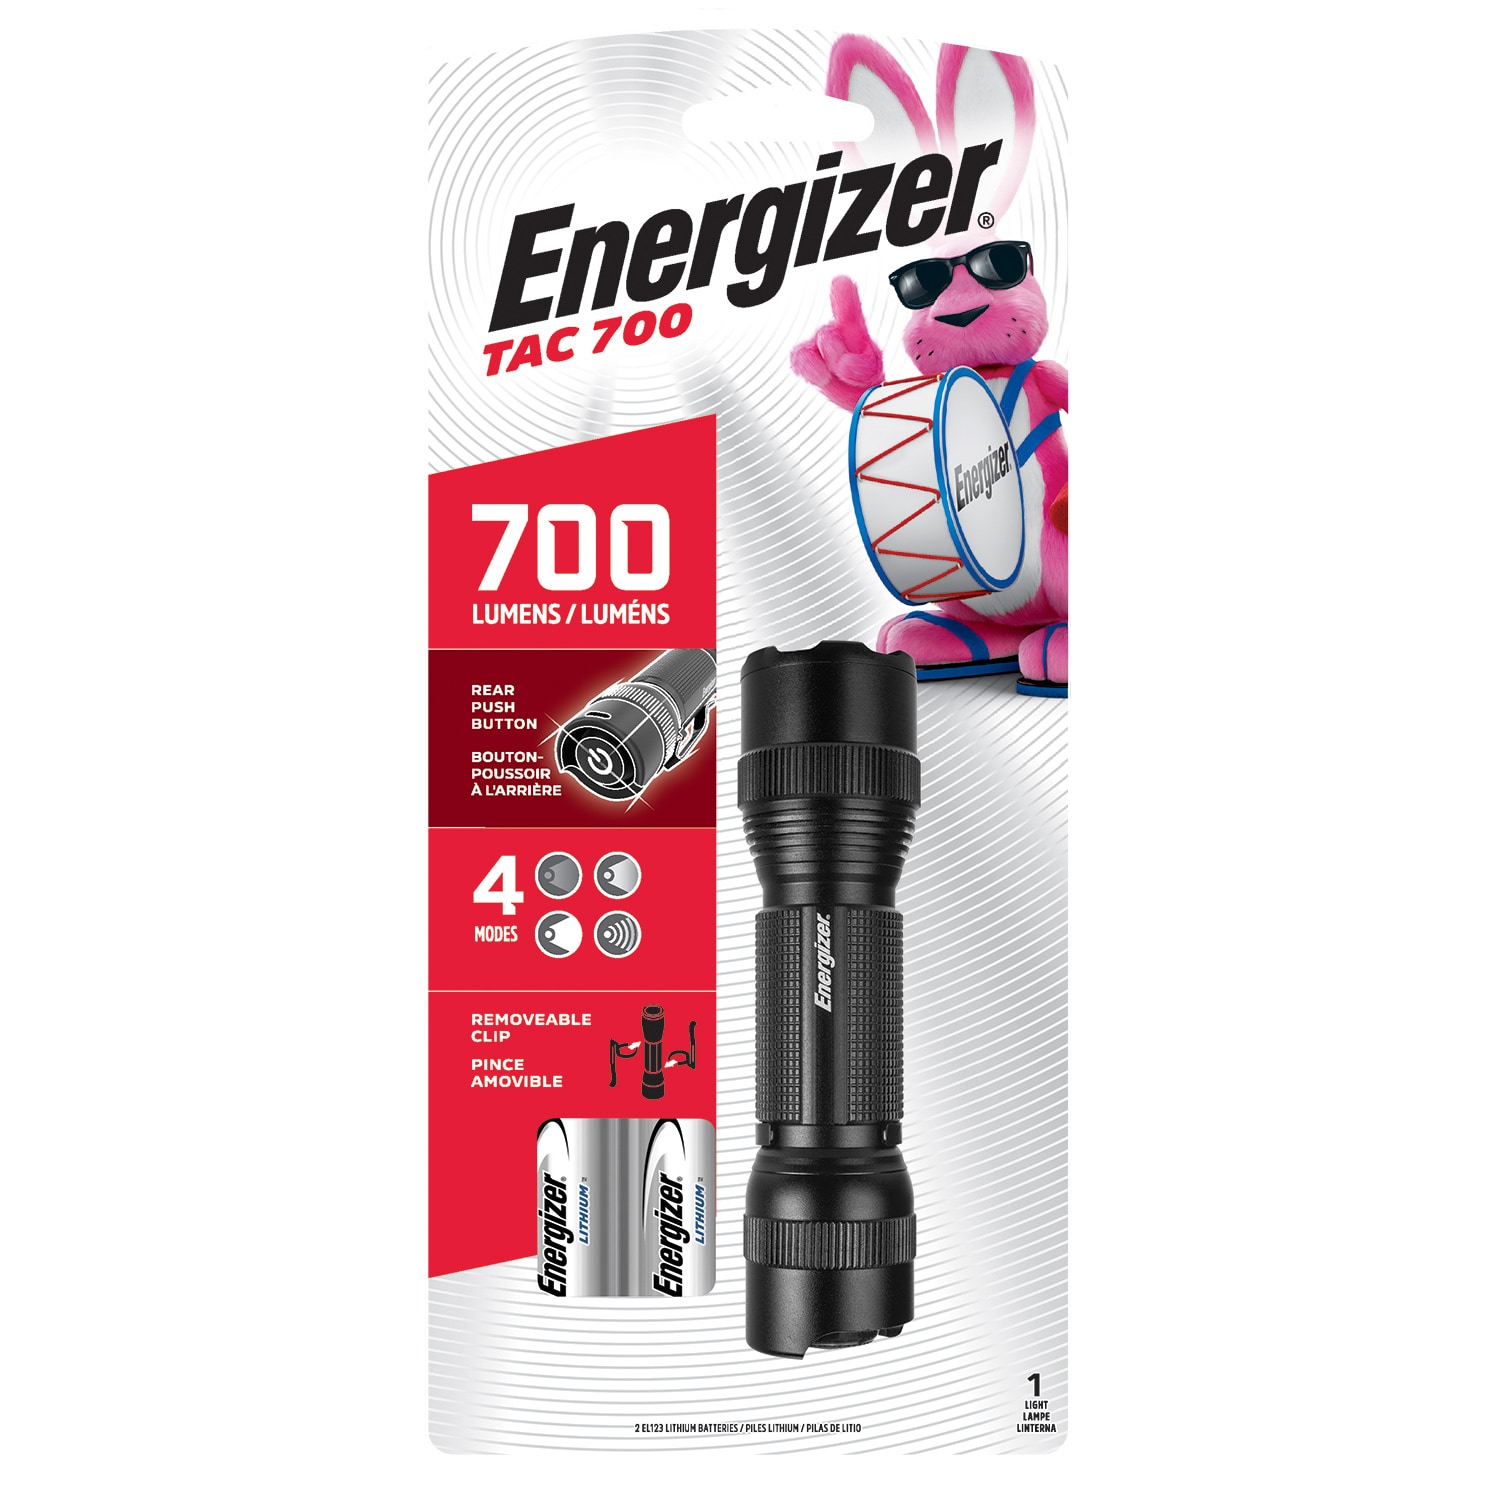 Energizer Tactical Light 700-Lumen 4 Modes Flashlight (123A Battery Included) in Flashlights department Lowes.com